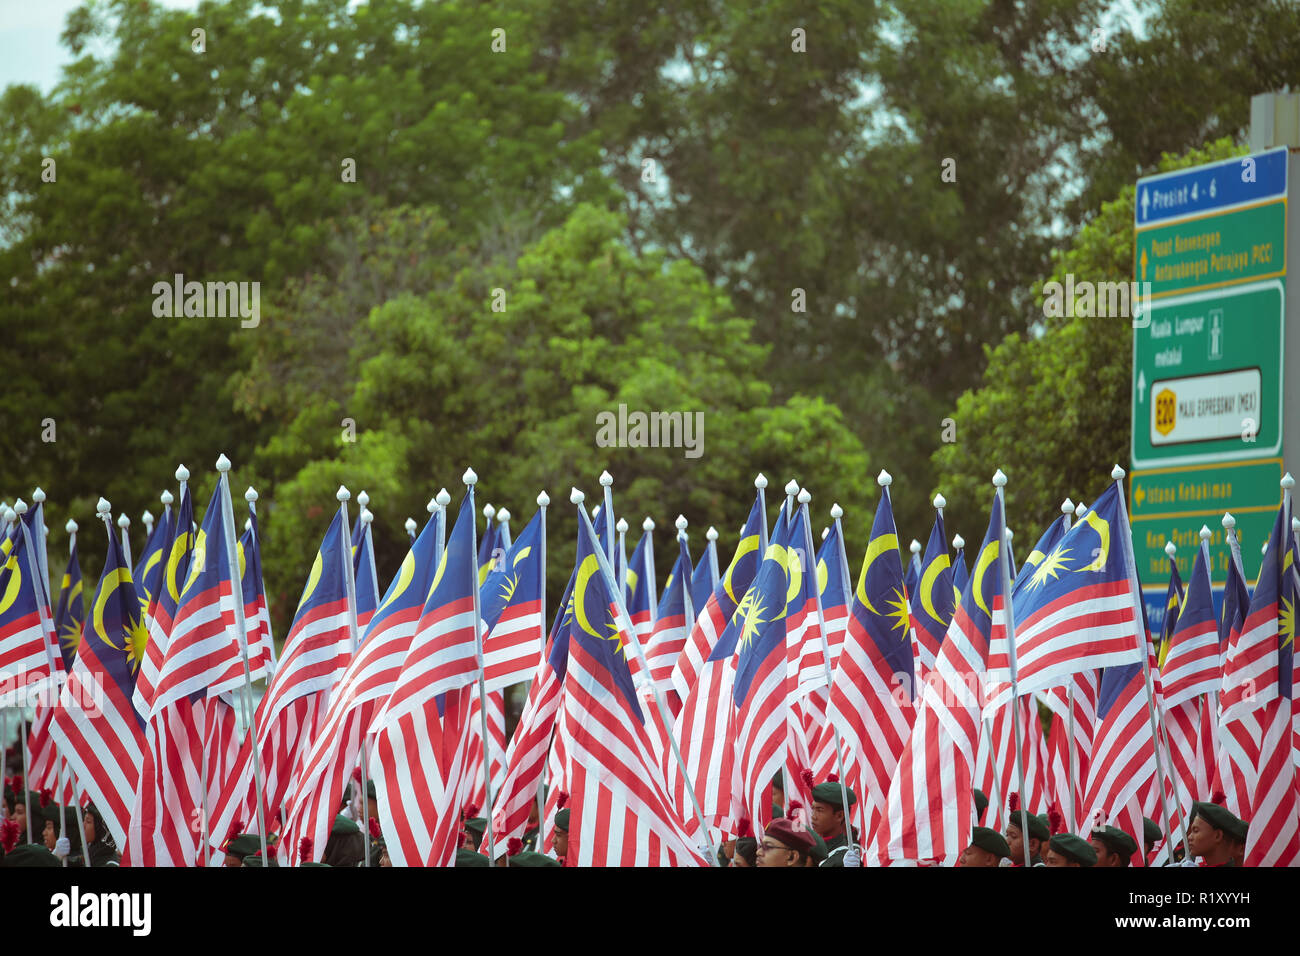 Military regime personnels holding high the national flag at Putrajaya during Malaysia independance day celebration 2018 Stock Photo